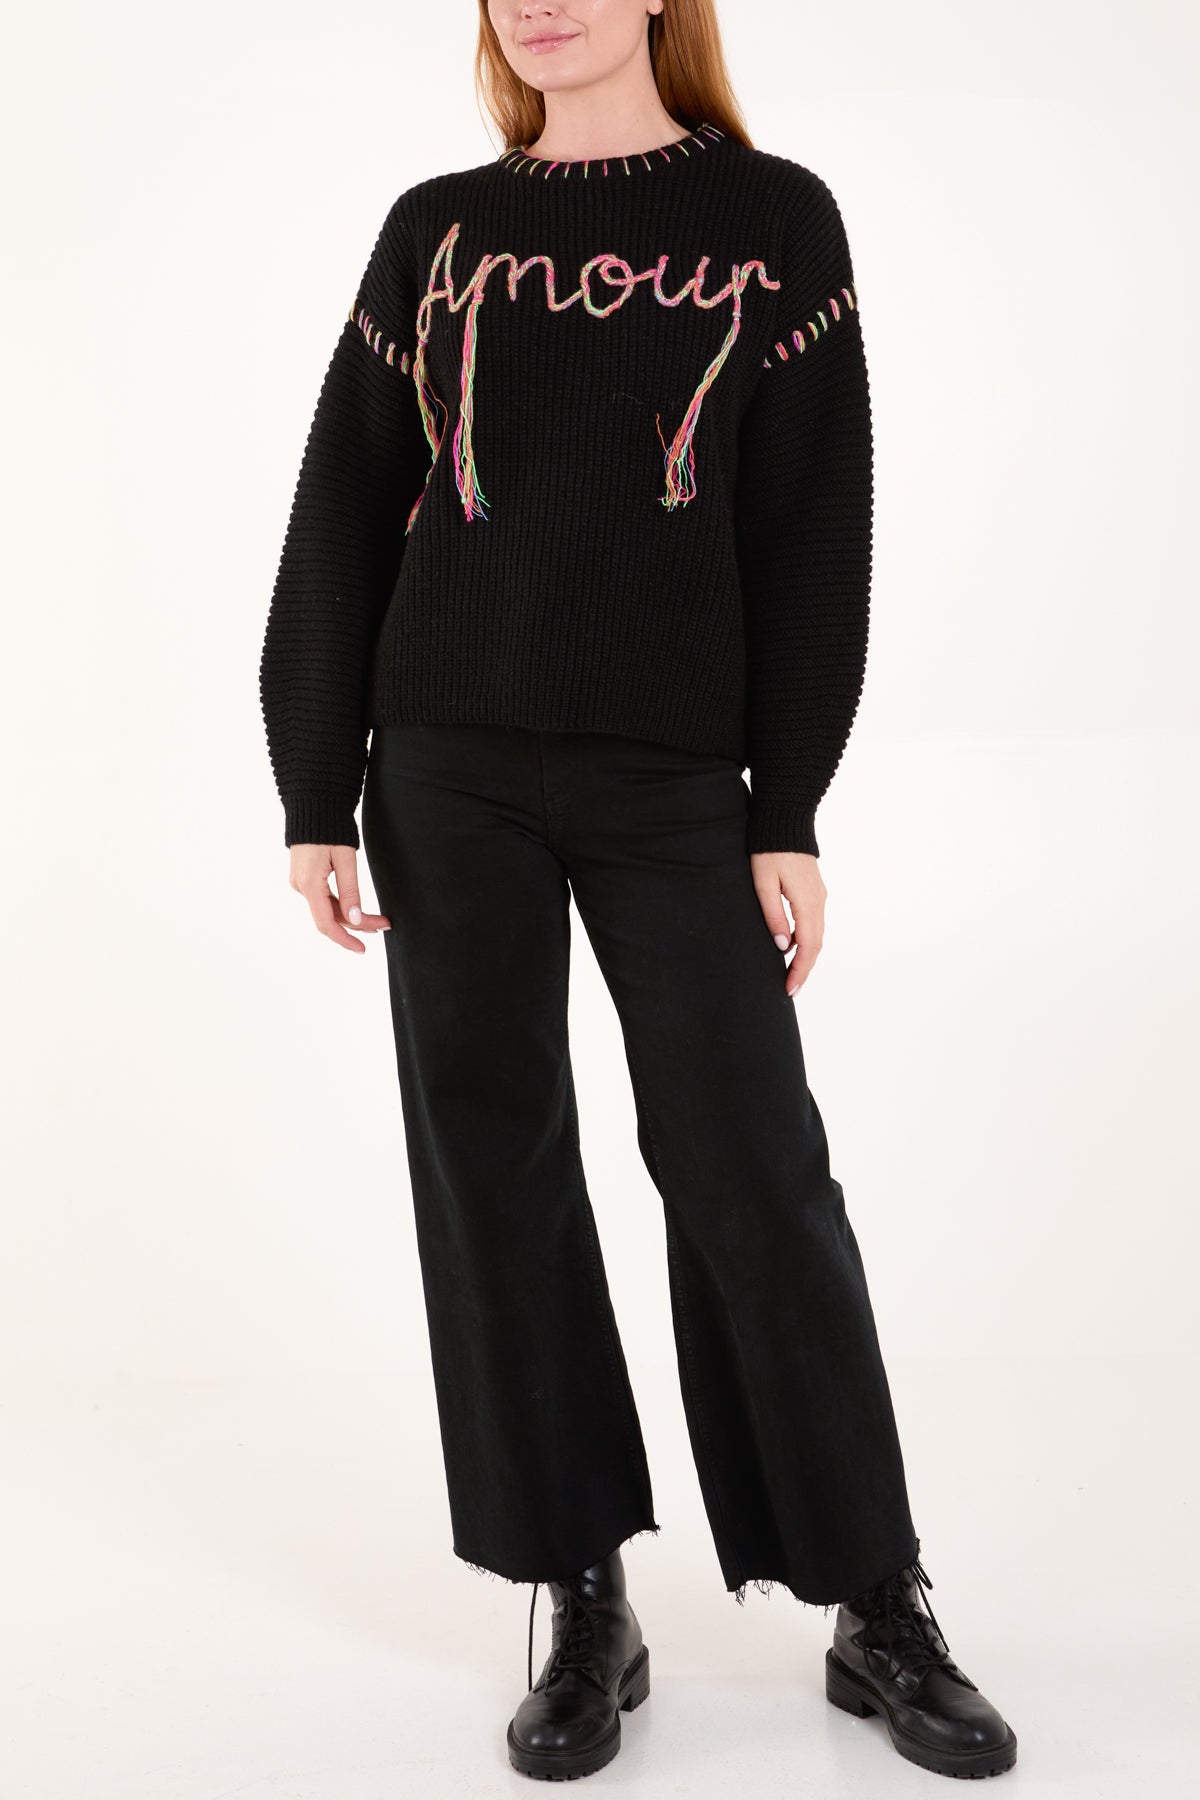 'Amour' Stich Embroidery Knit Jumper